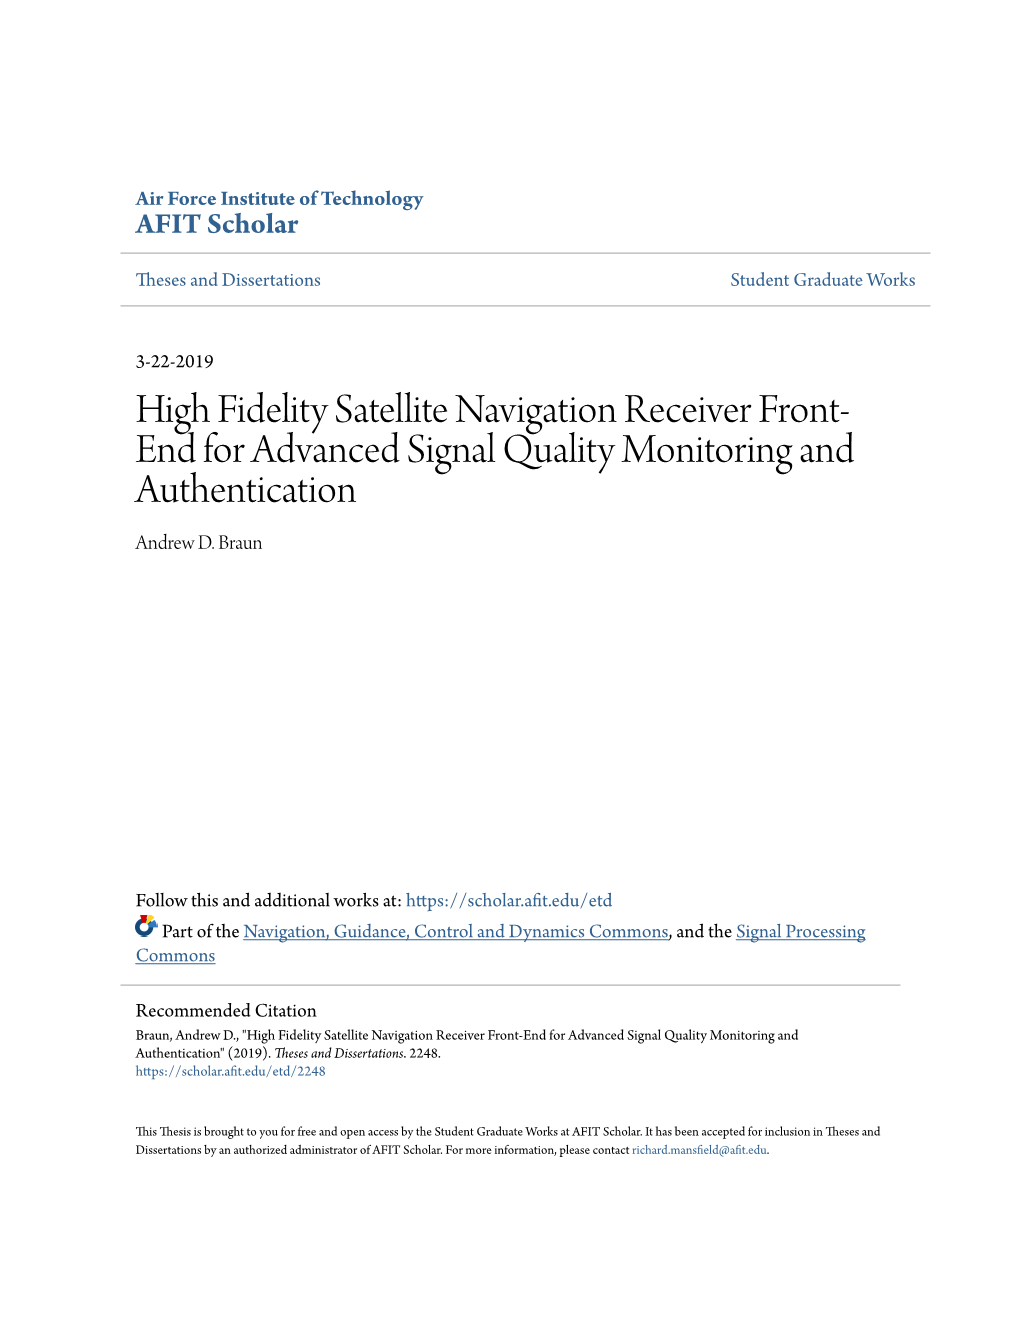 High Fidelity Satellite Navigation Receiver Front-End for Advanced Signal Quality Monitoring and Authentication" (2019)